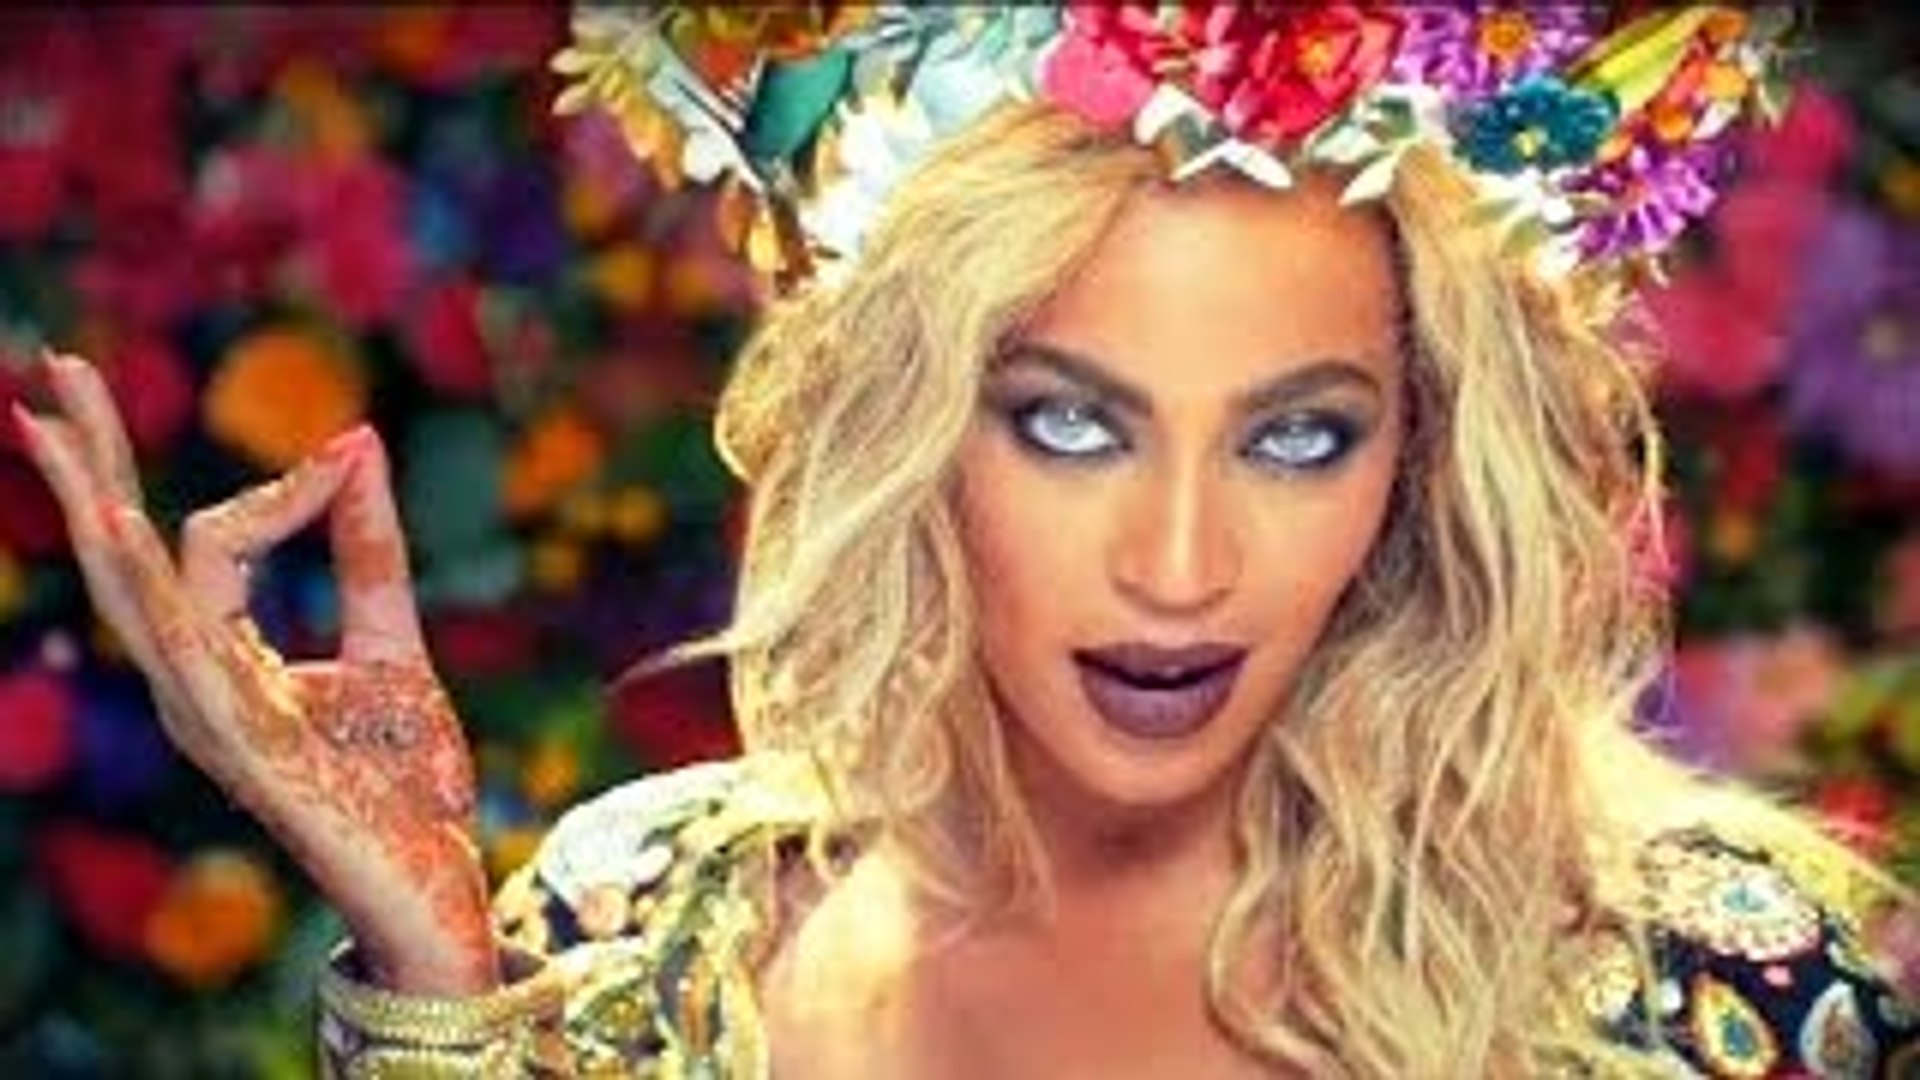 BEYONCE HYMN FOR THE WEEKEND QUEEN BEY COLDPLAY MUSIC VIDEO CULT -  Dailymotion Video